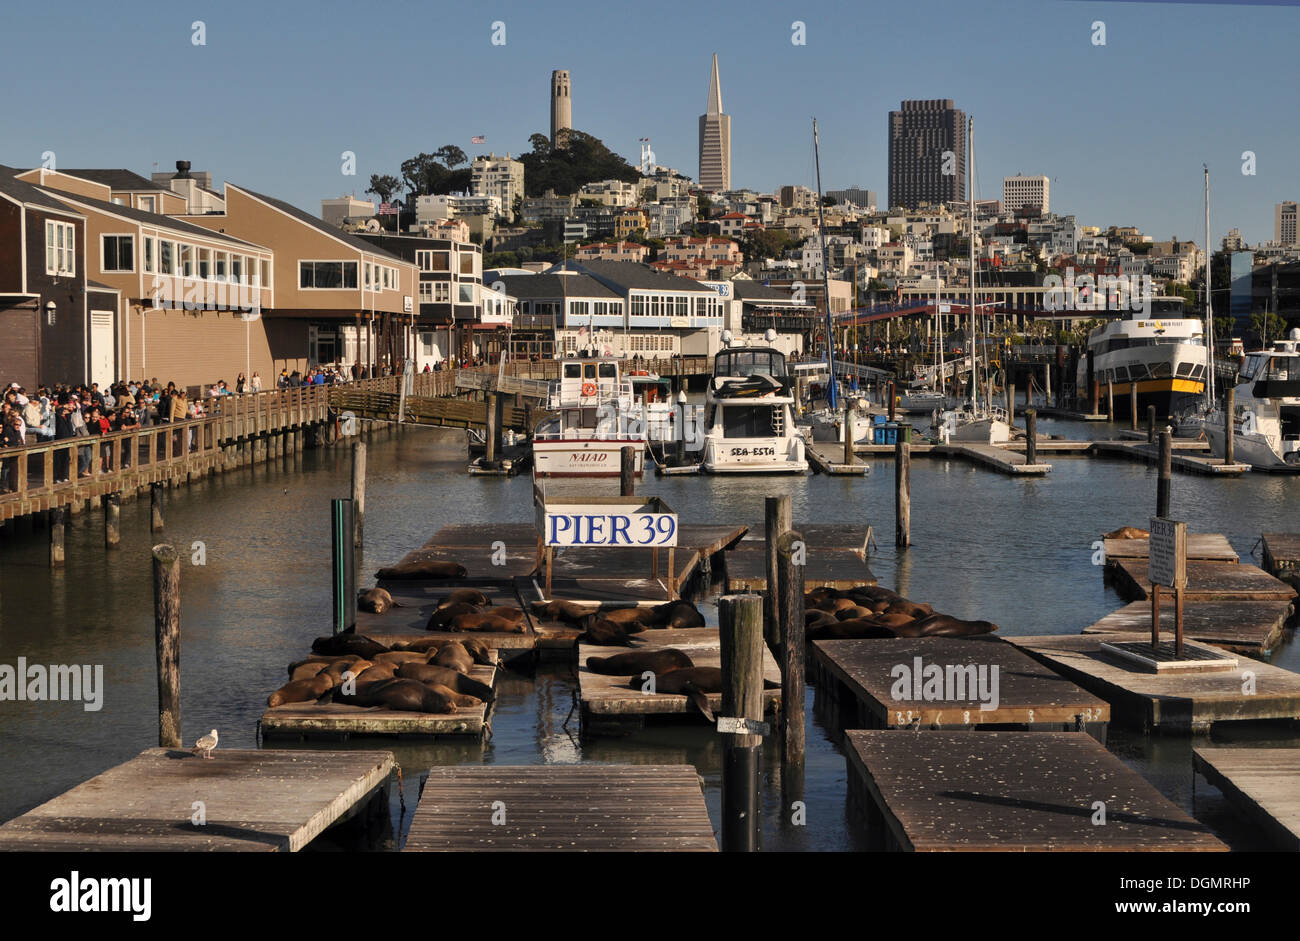 Pier 39. Coit Tower and Transamerica Building in the backdrop, San Francisco, California, United States Stock Photo